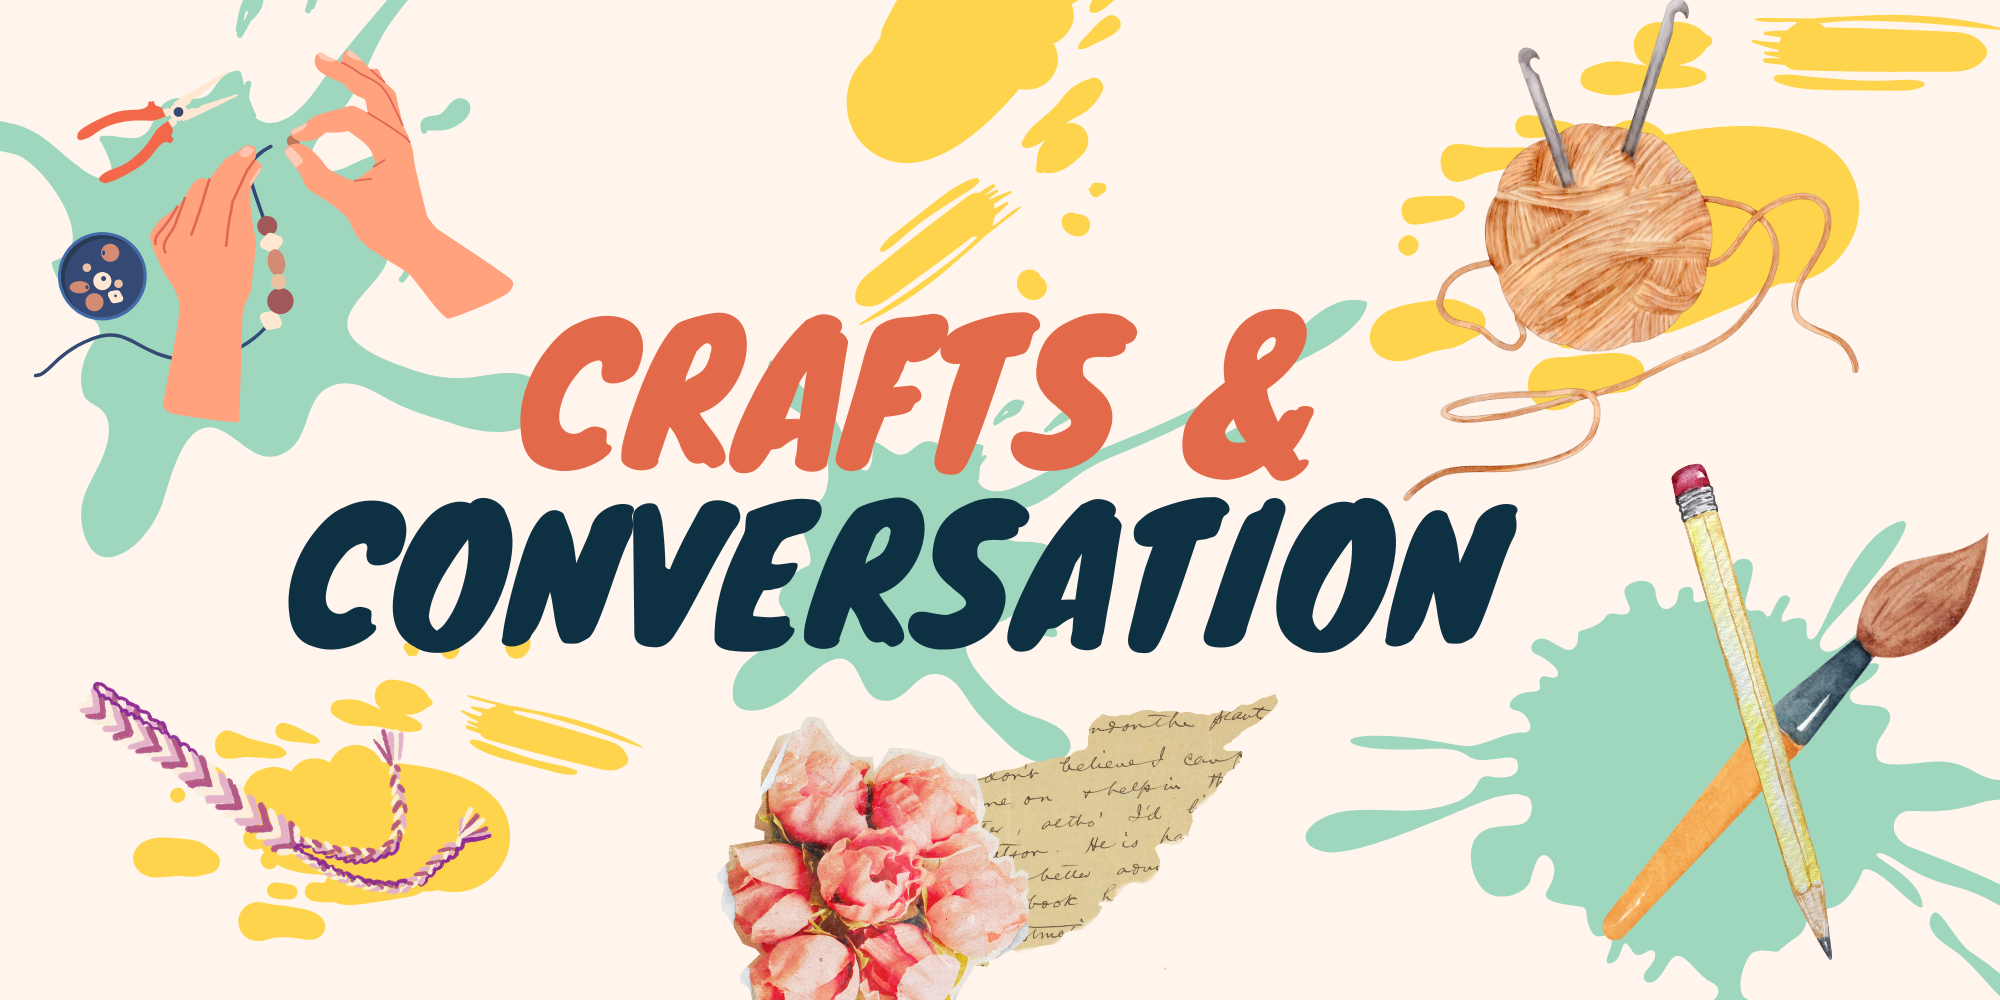 Crafts & Conversation: Painting and Drawing